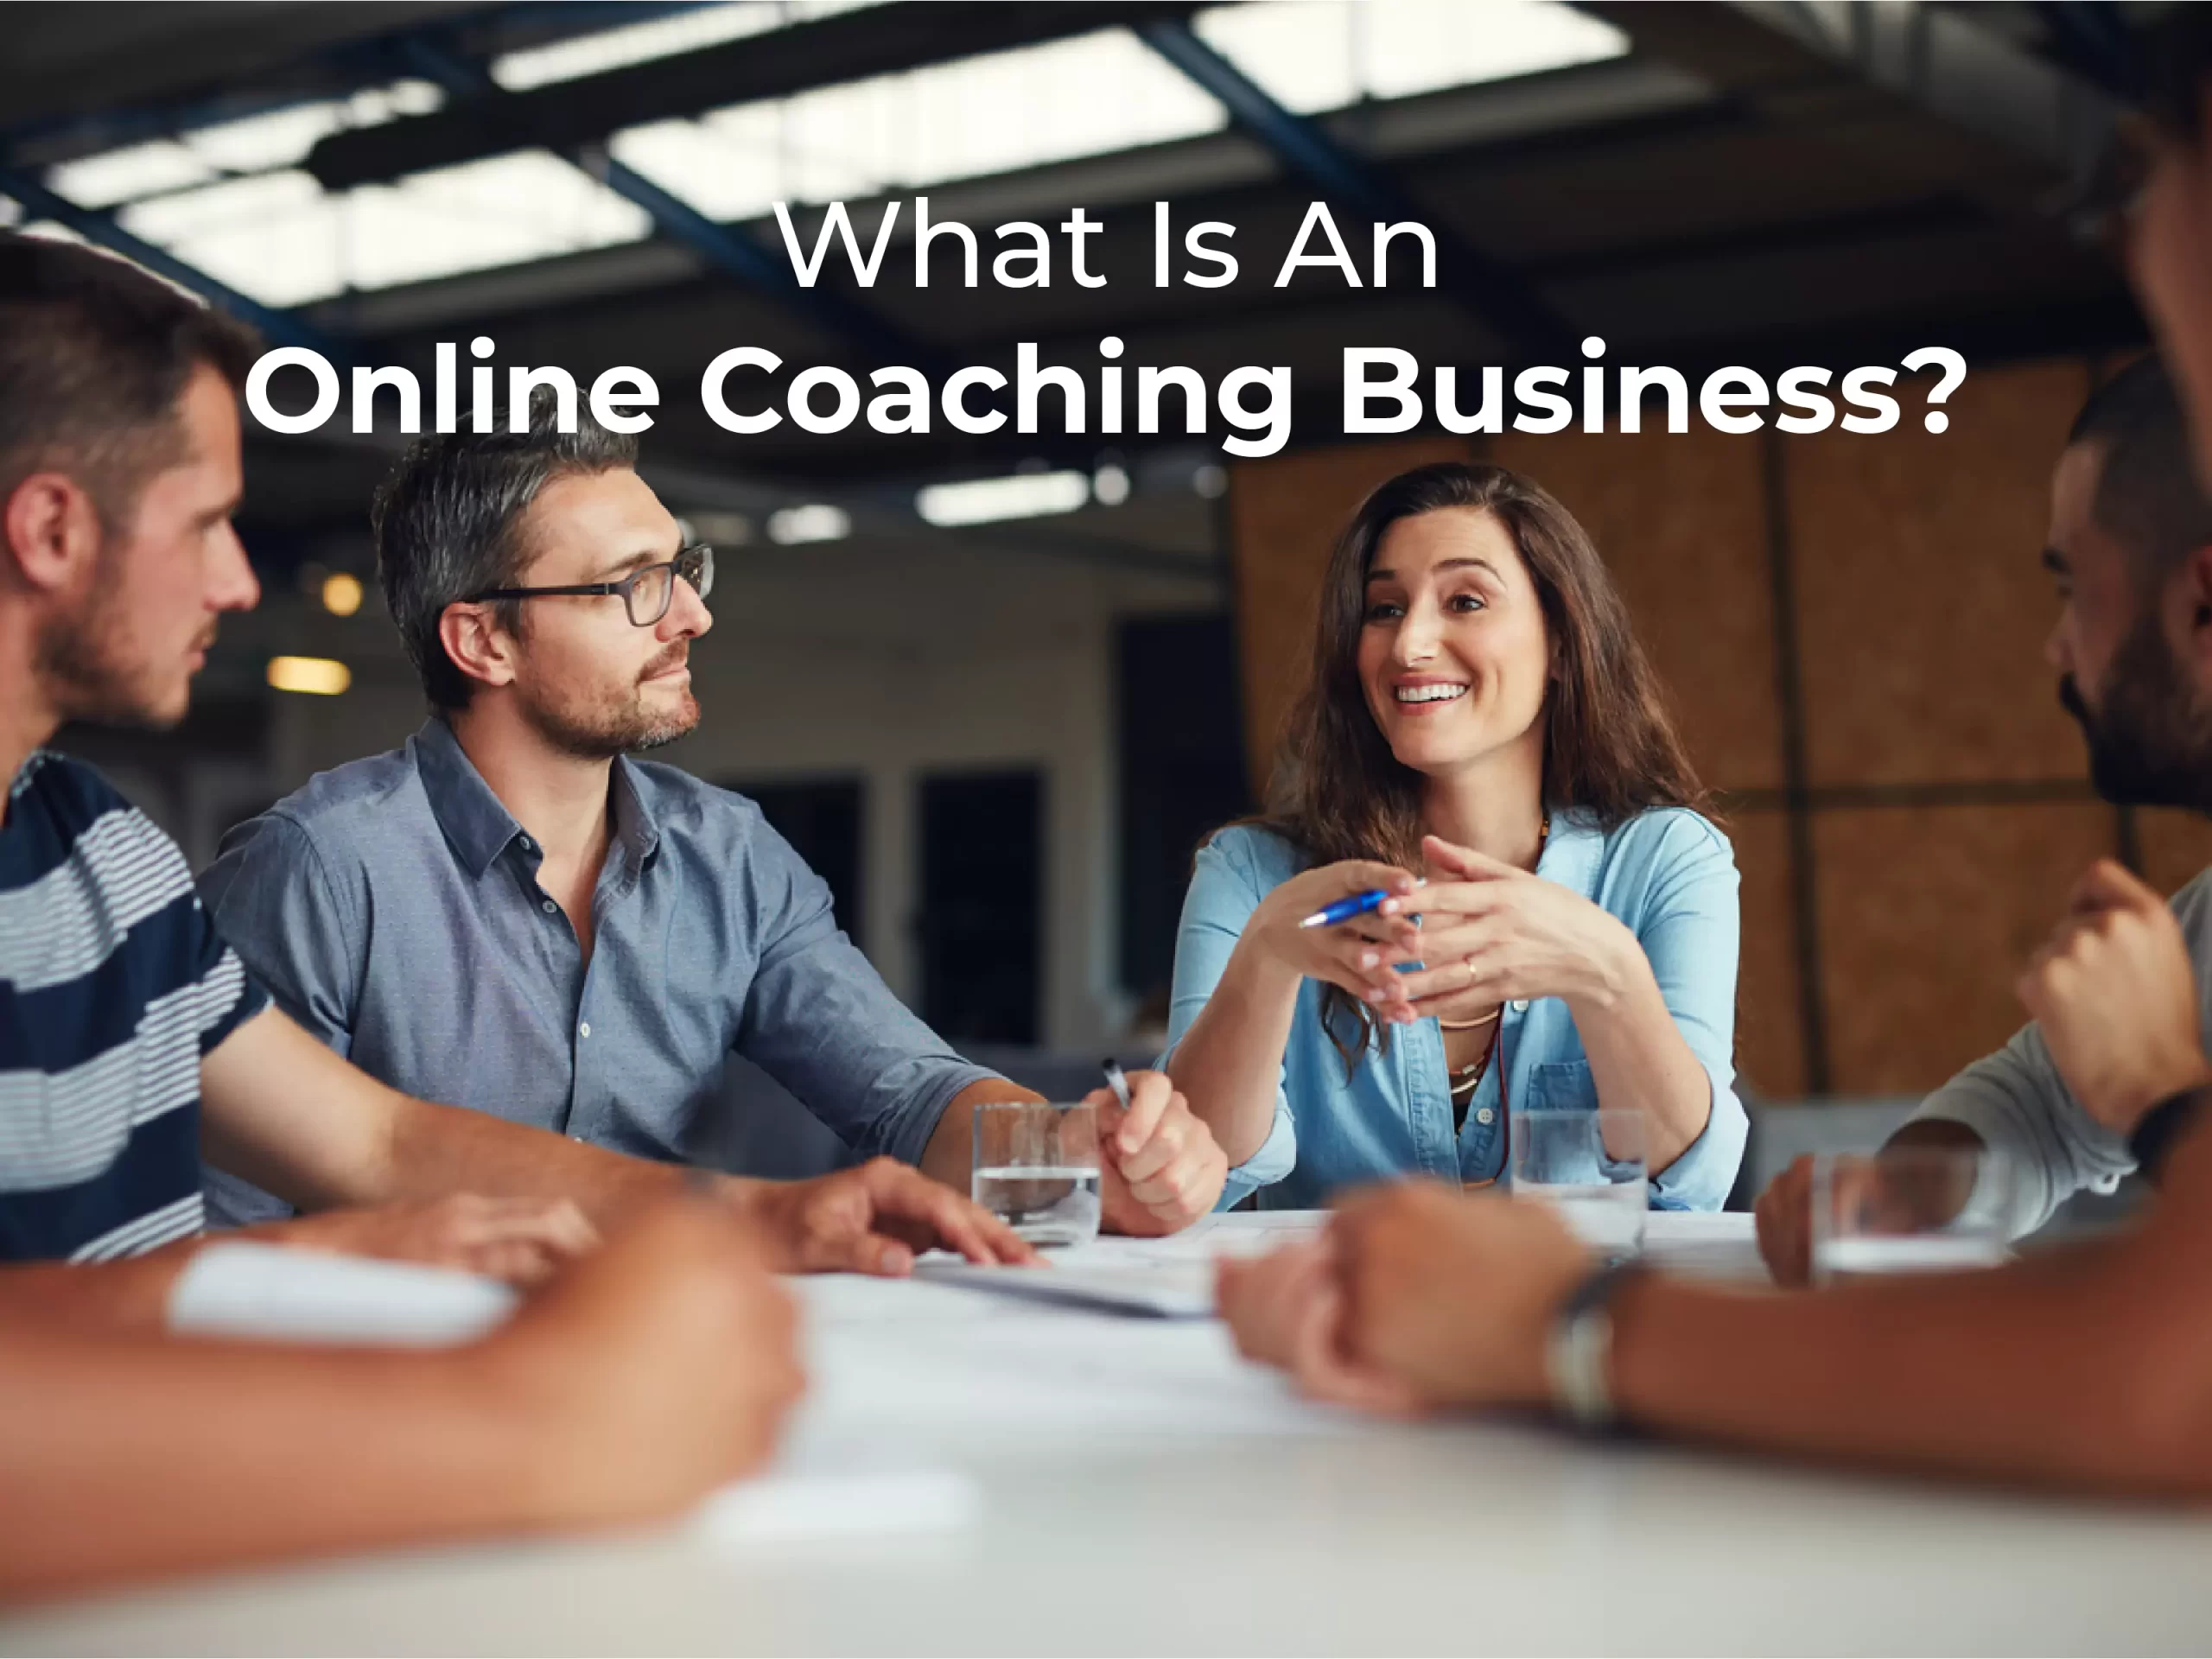 What Is An Online Coaching Business?